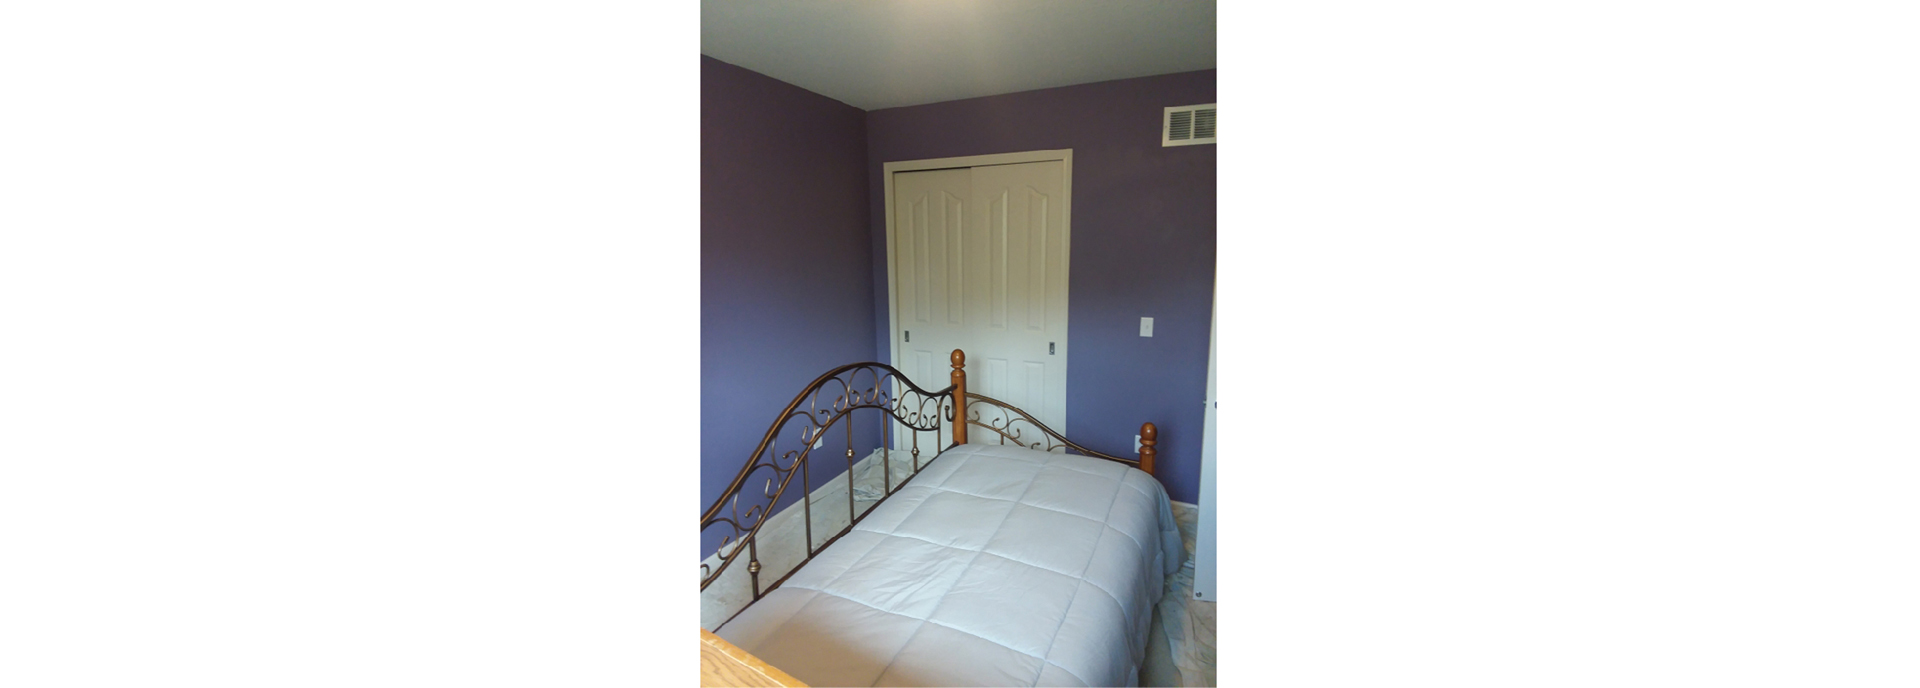 broadview heights house painting bedroom before and after - before